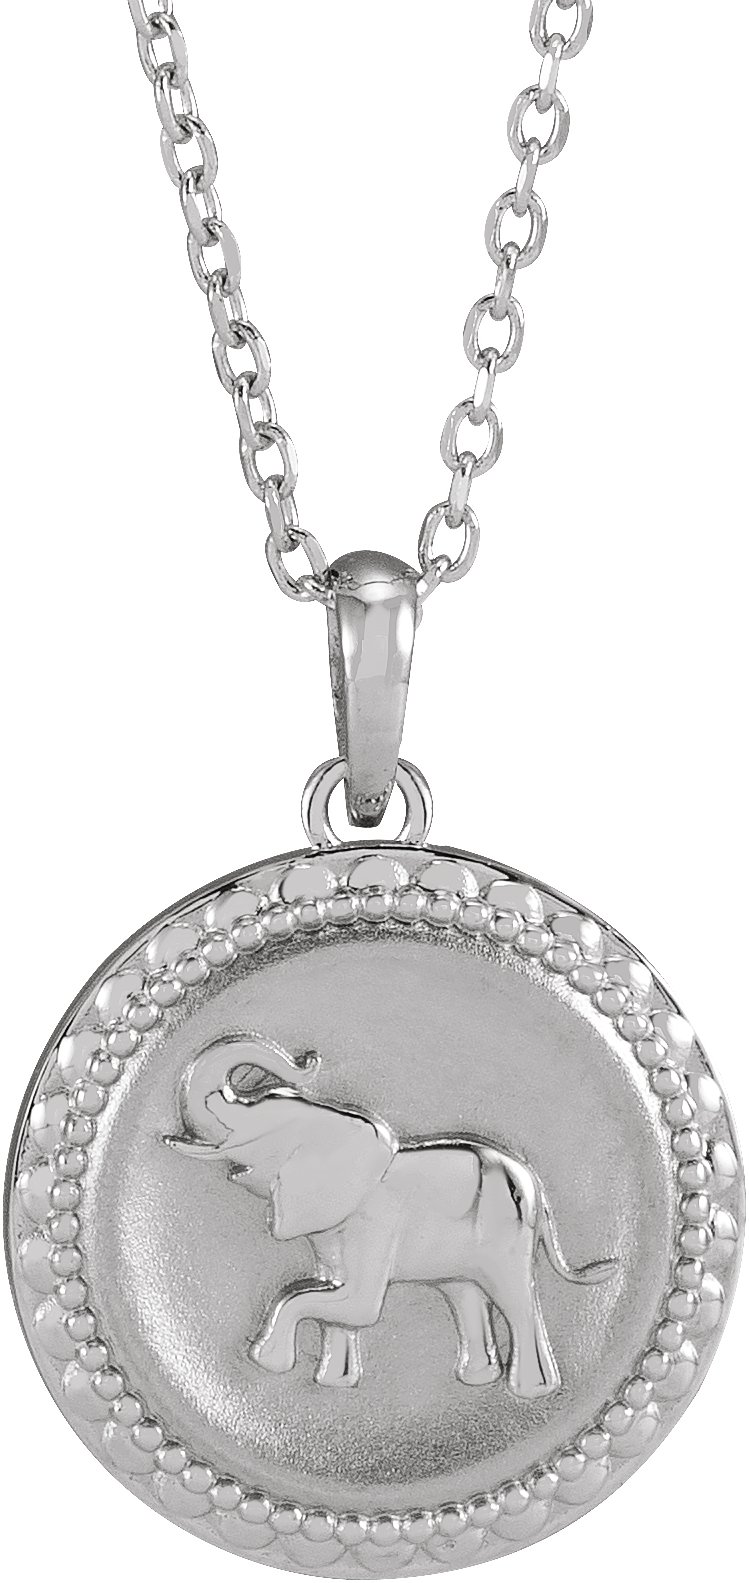 Sterling Silver Elephant Disc 16-18" Necklace